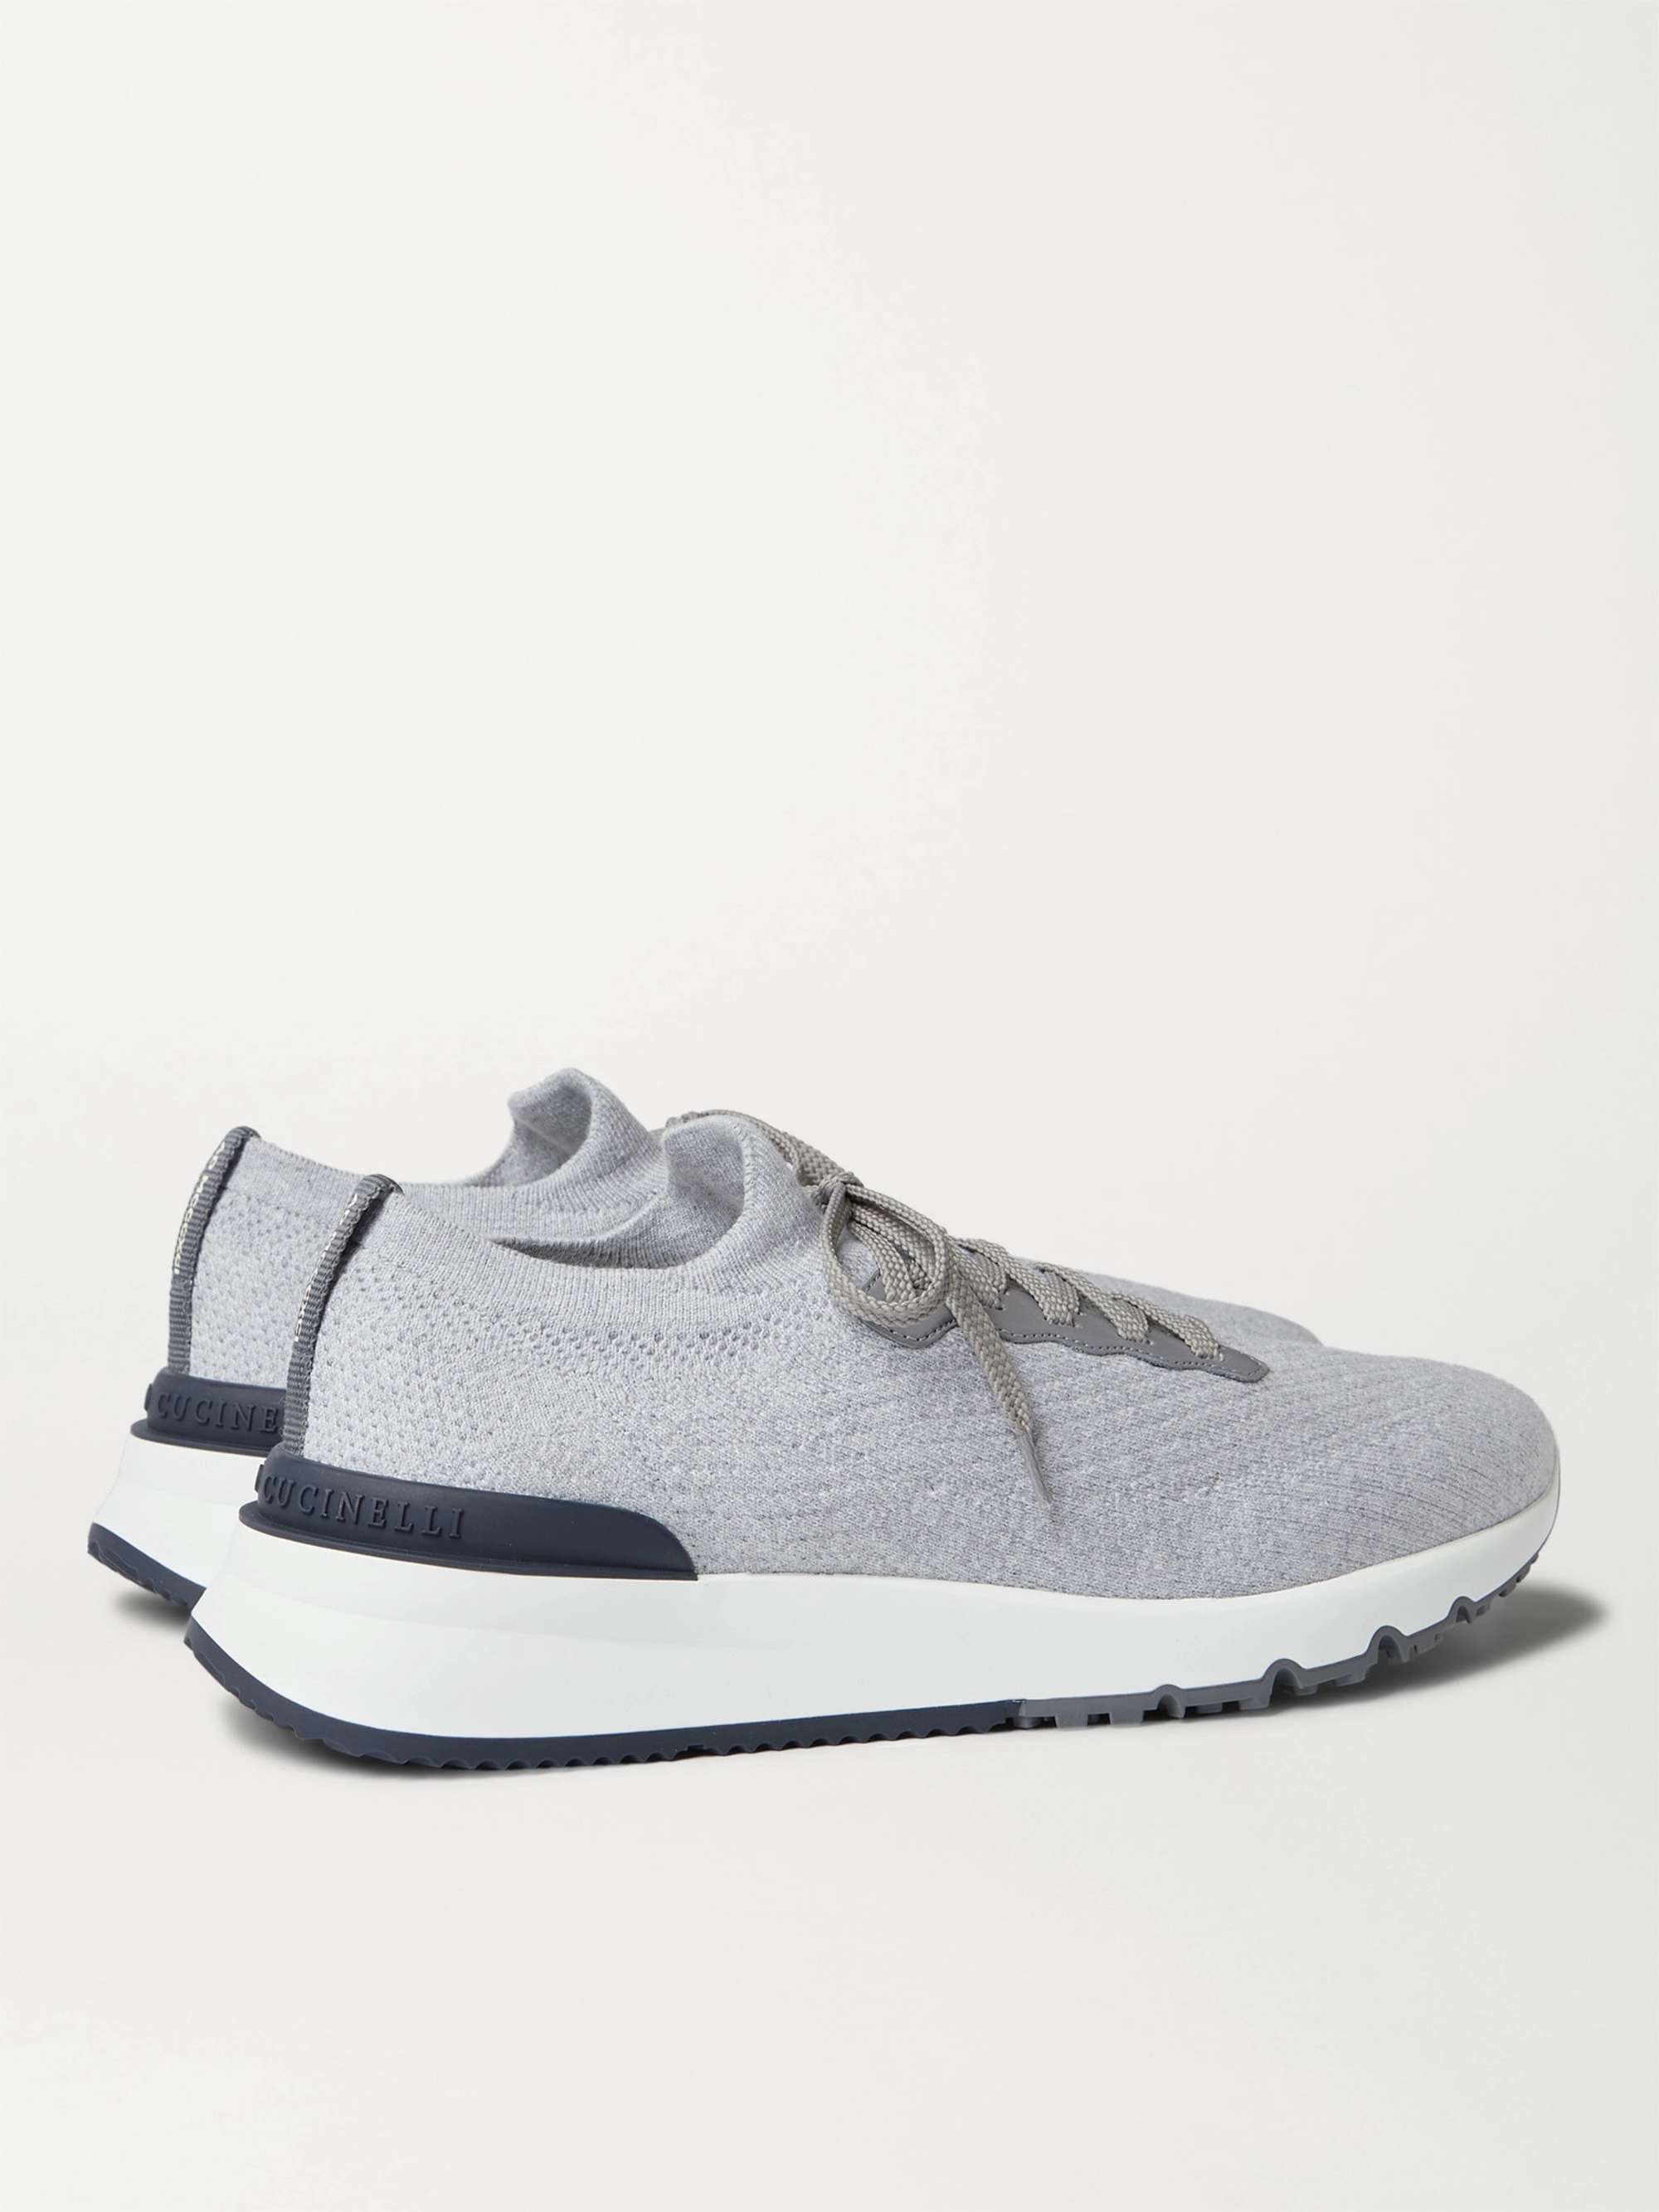 BRUNELLO CUCINELLI Leather-Trimmed Stretch-Knit Sneakers